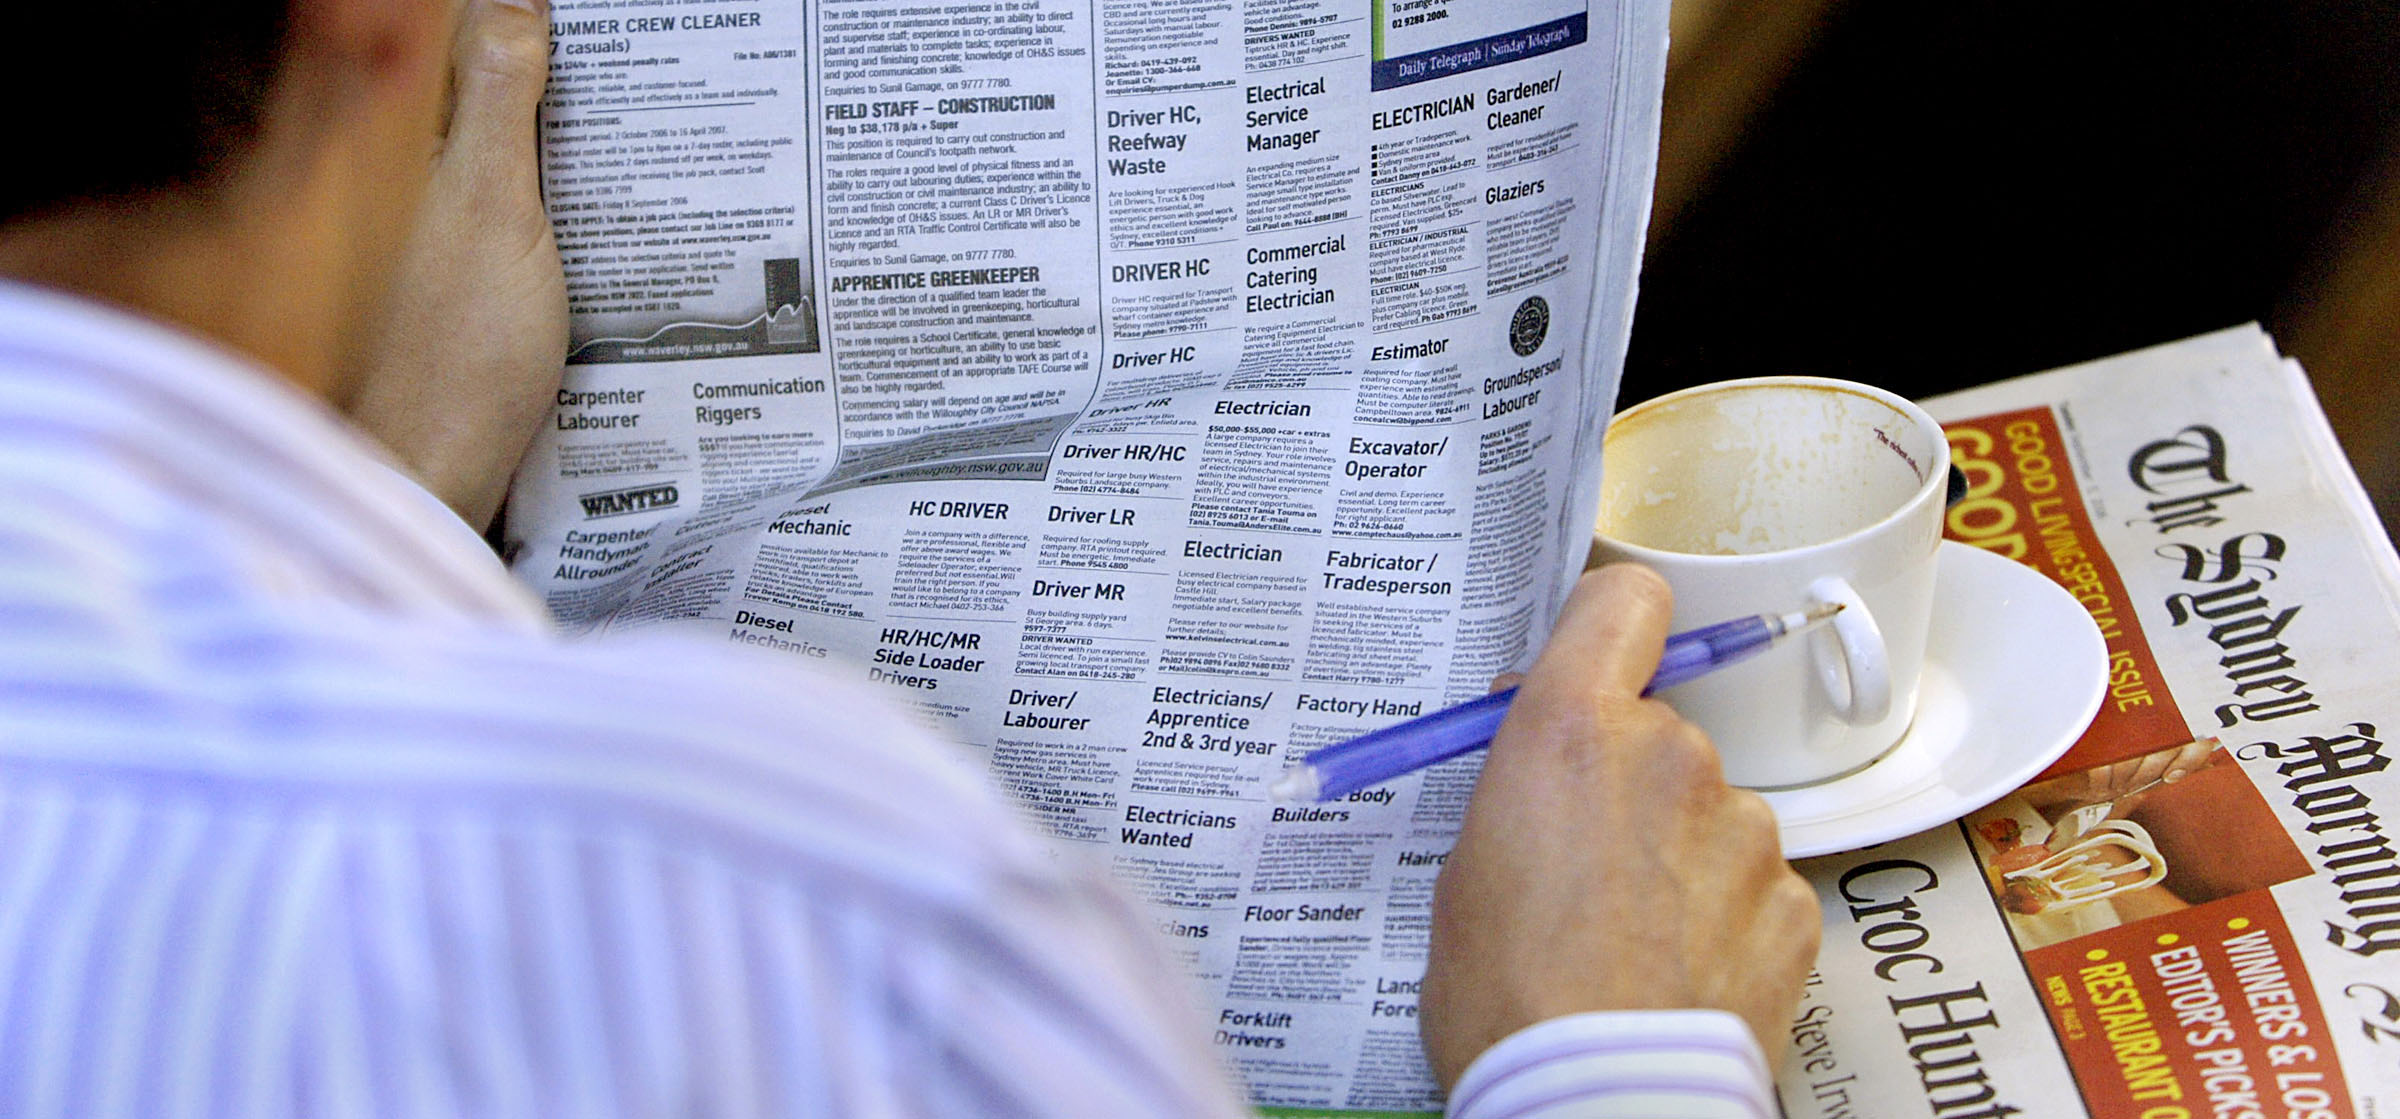 A man checks the newspaper job adverts at a cafe in Sydney, Australia, on Tuesday, September 5, 2006.  Australia's jobless rate unexpectedly fell to a 31-year low
in January as fewer people sought work, raising expectations interest rates may climb again.